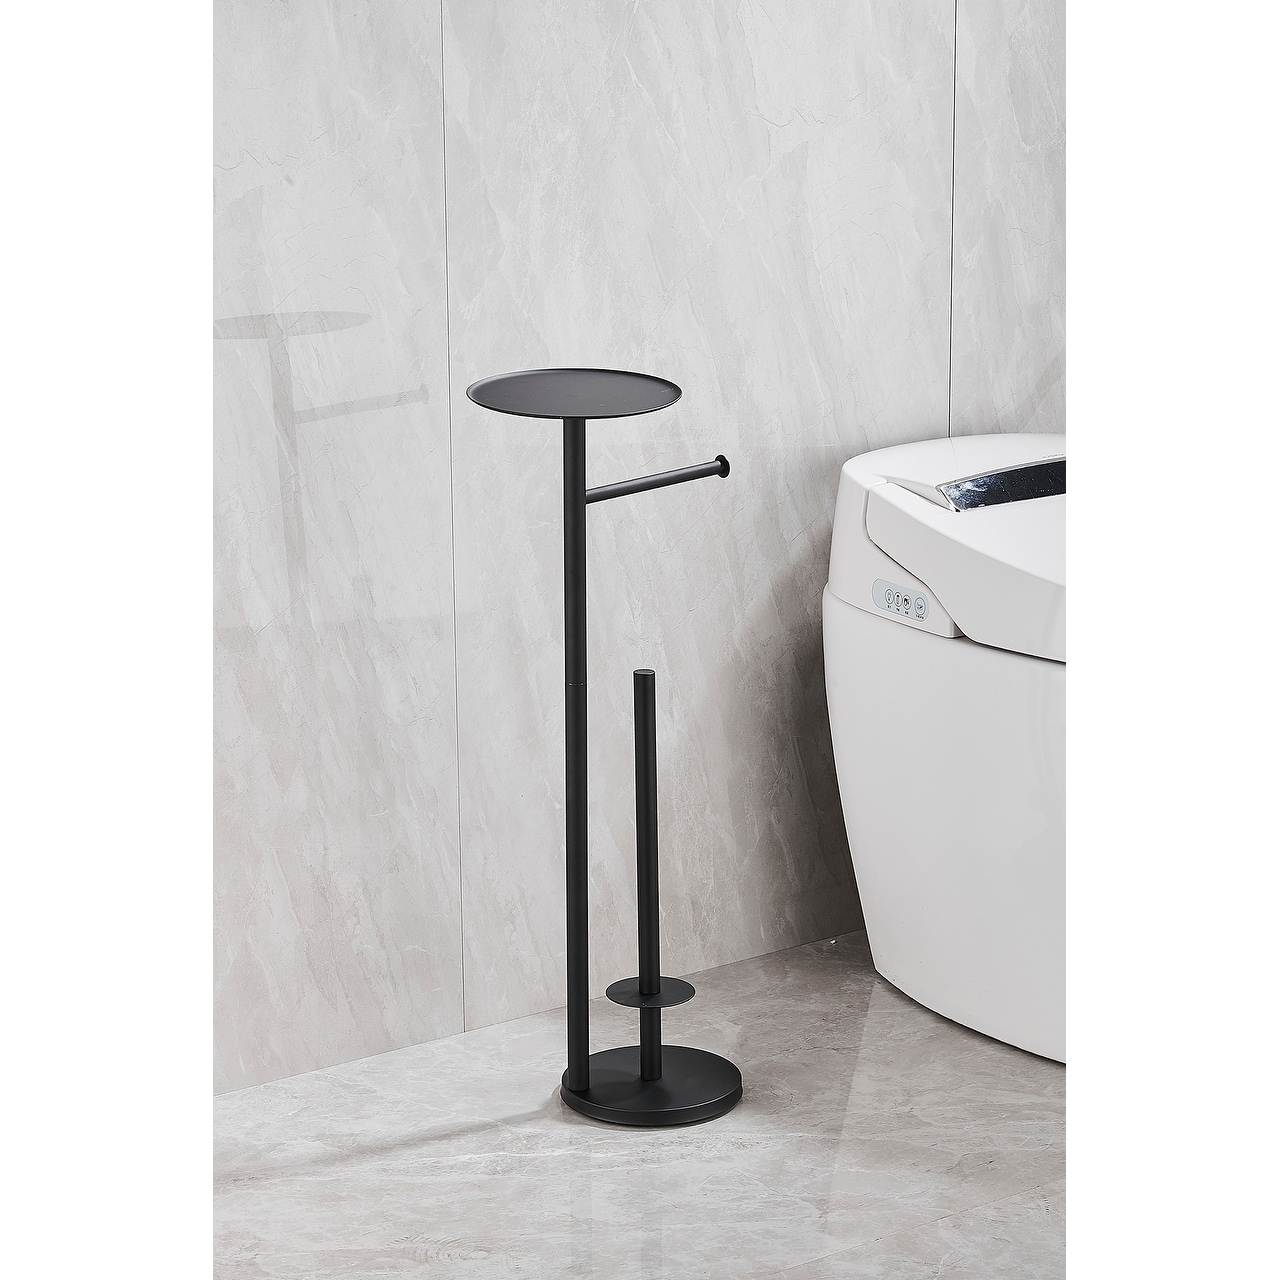 https://ak1.ostkcdn.com/images/products/is/images/direct/17b248969eb47de9e34c4a60f06b59504abbf1b3/Freestanding-Toilet-Paper-Holder-Stand.jpg